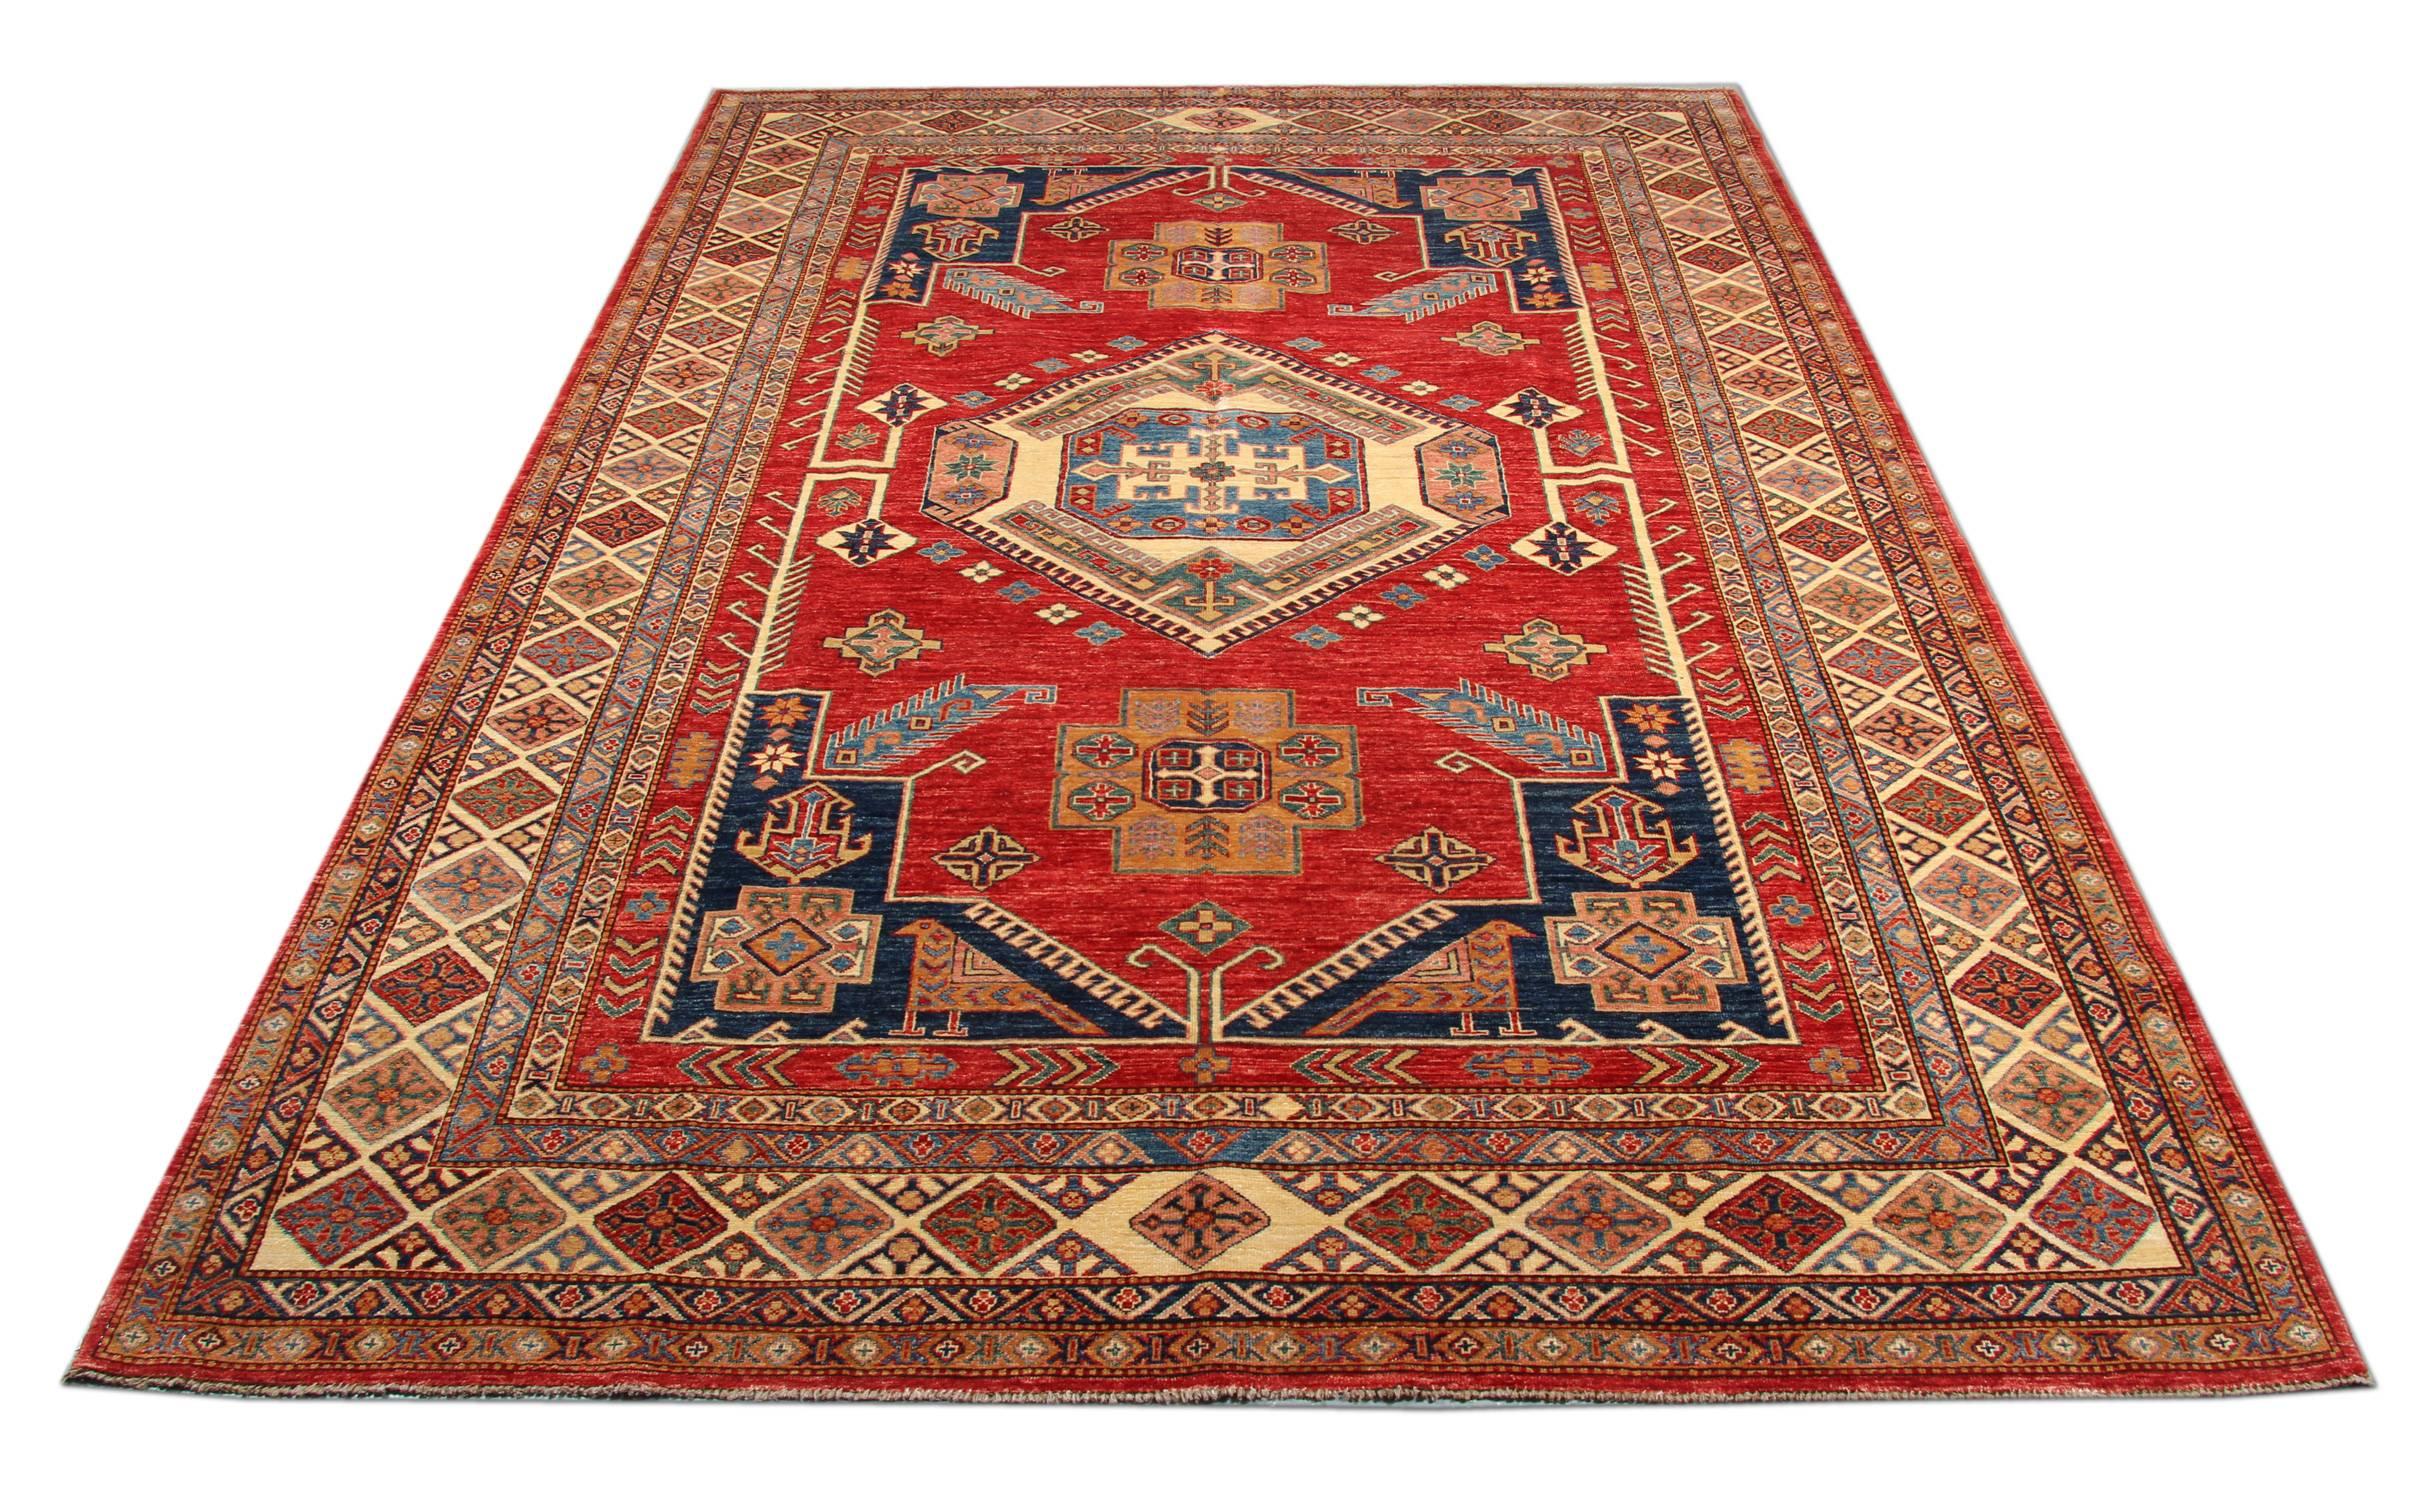 New traditional handwoven Kazak rug with a bold geometric design in red blue and white with a central medallions pattern. Made by hand in wool and cotton.